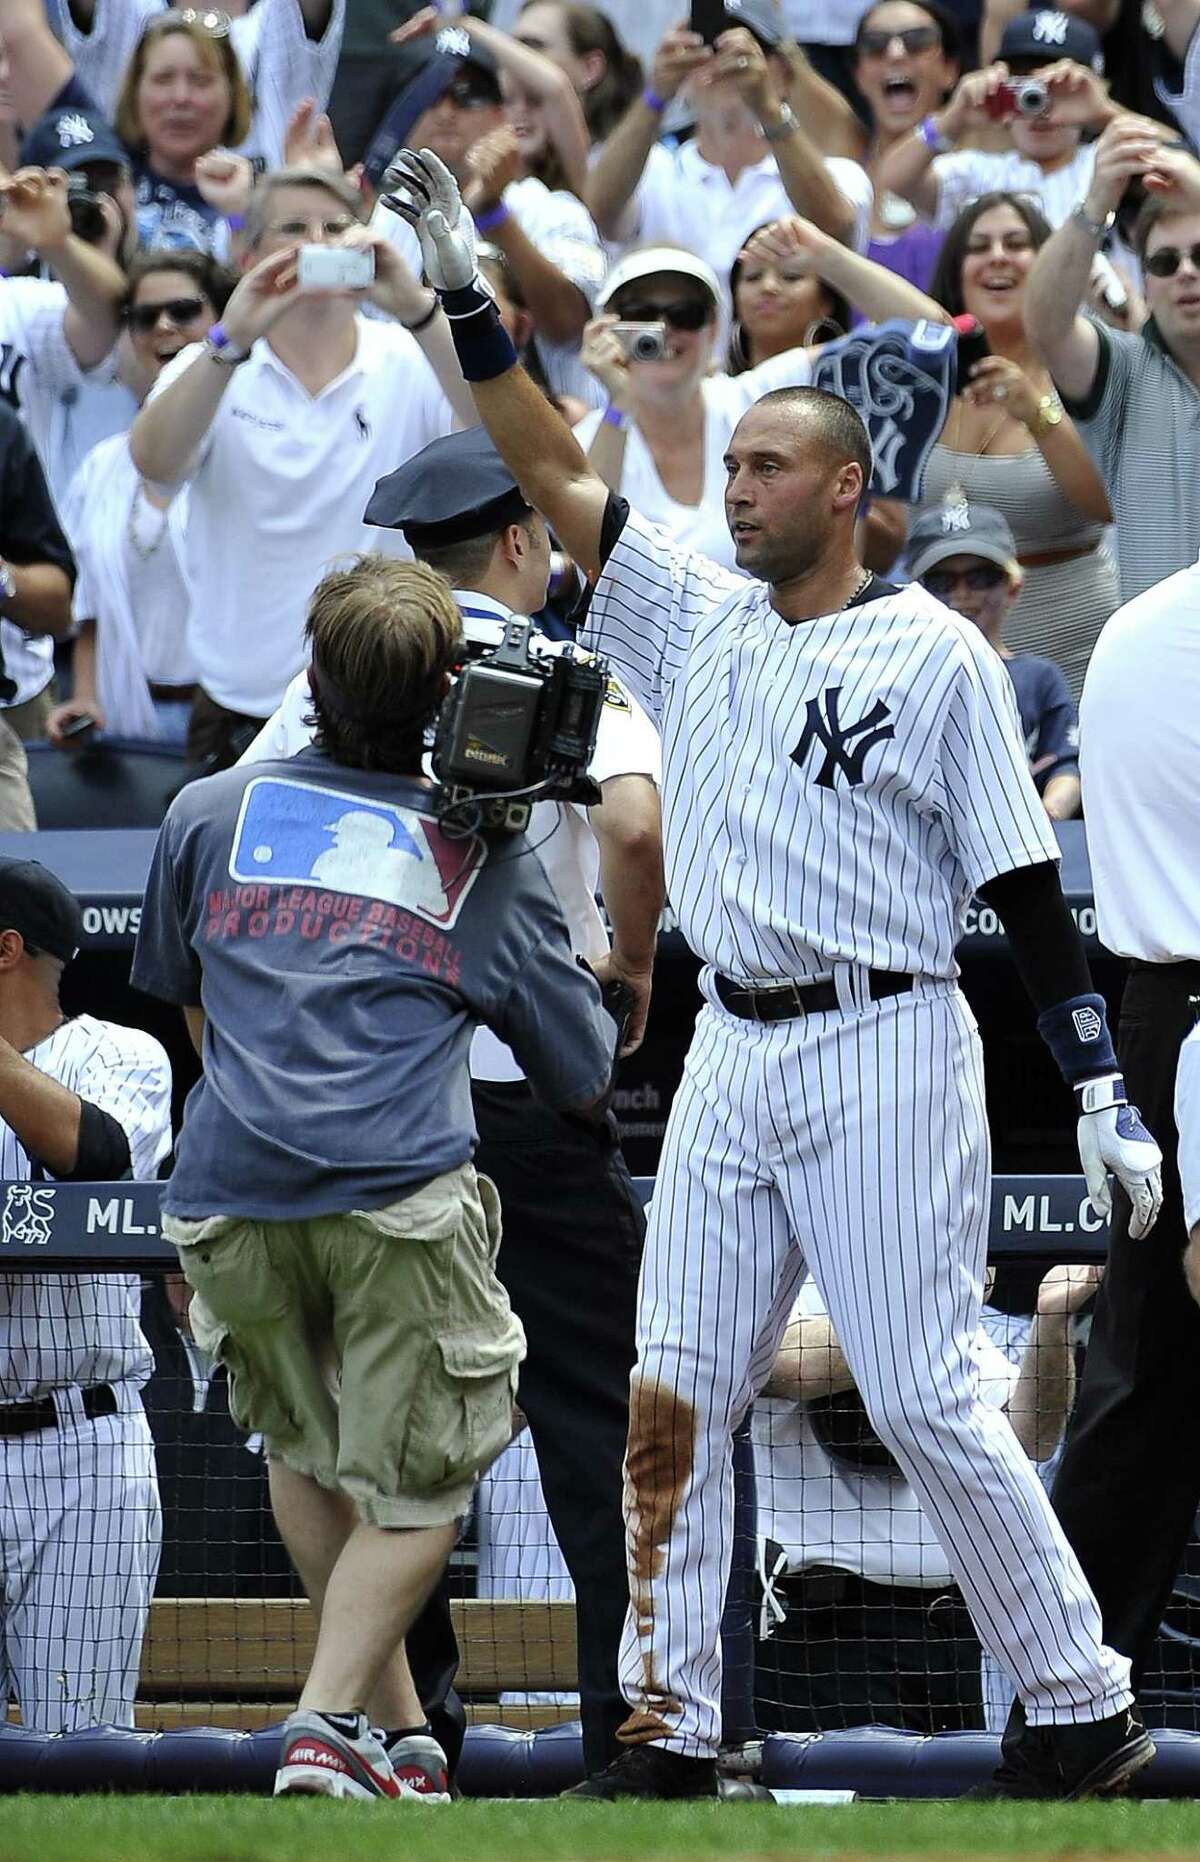 New York Yankees Derek Jeter waves to the cheers of the crowd after he hit a solo home run, for his 3,000th career hit off of Tampa Bay Rays starting pitcher David Price in the third inning of a baseball game on Saturday, July 9, 2011 at Yankee Stadium in New York. (AP Photo/Kathy Kmonicek)